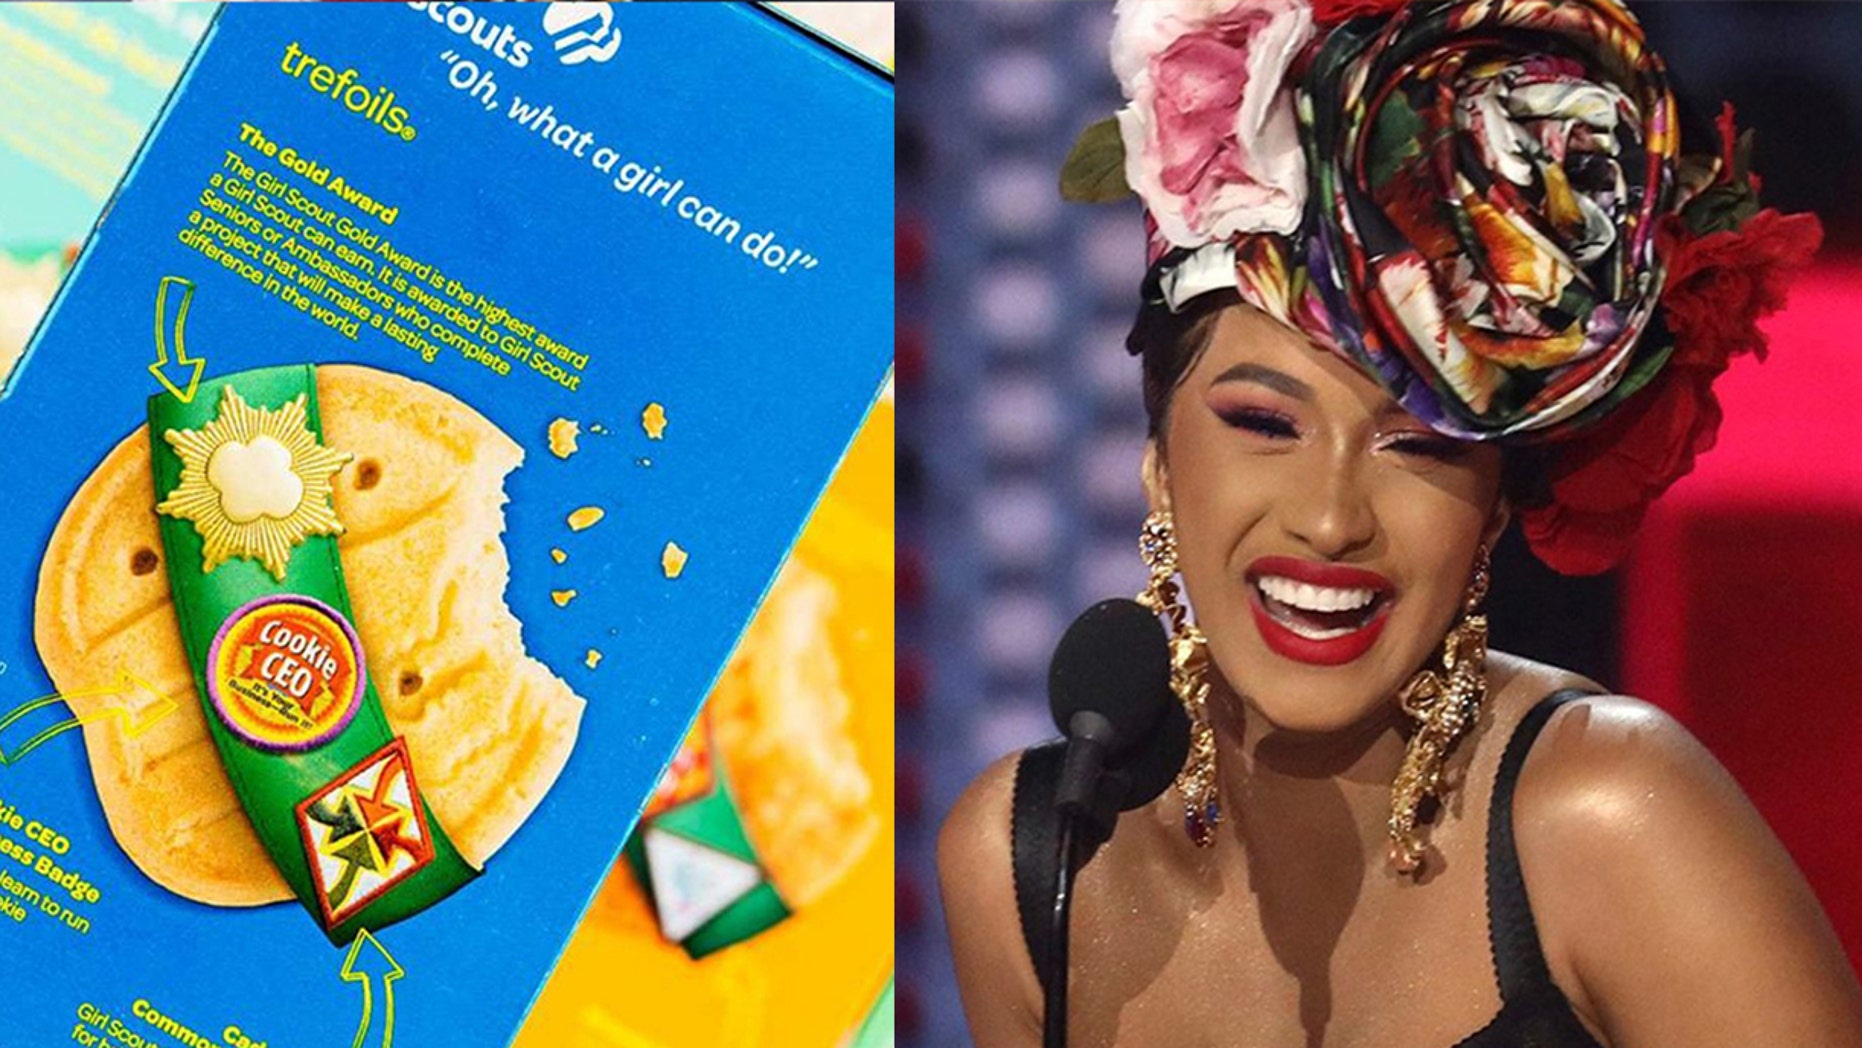 California Girl Scout’s cookie-themed Cardi B remix goes viral